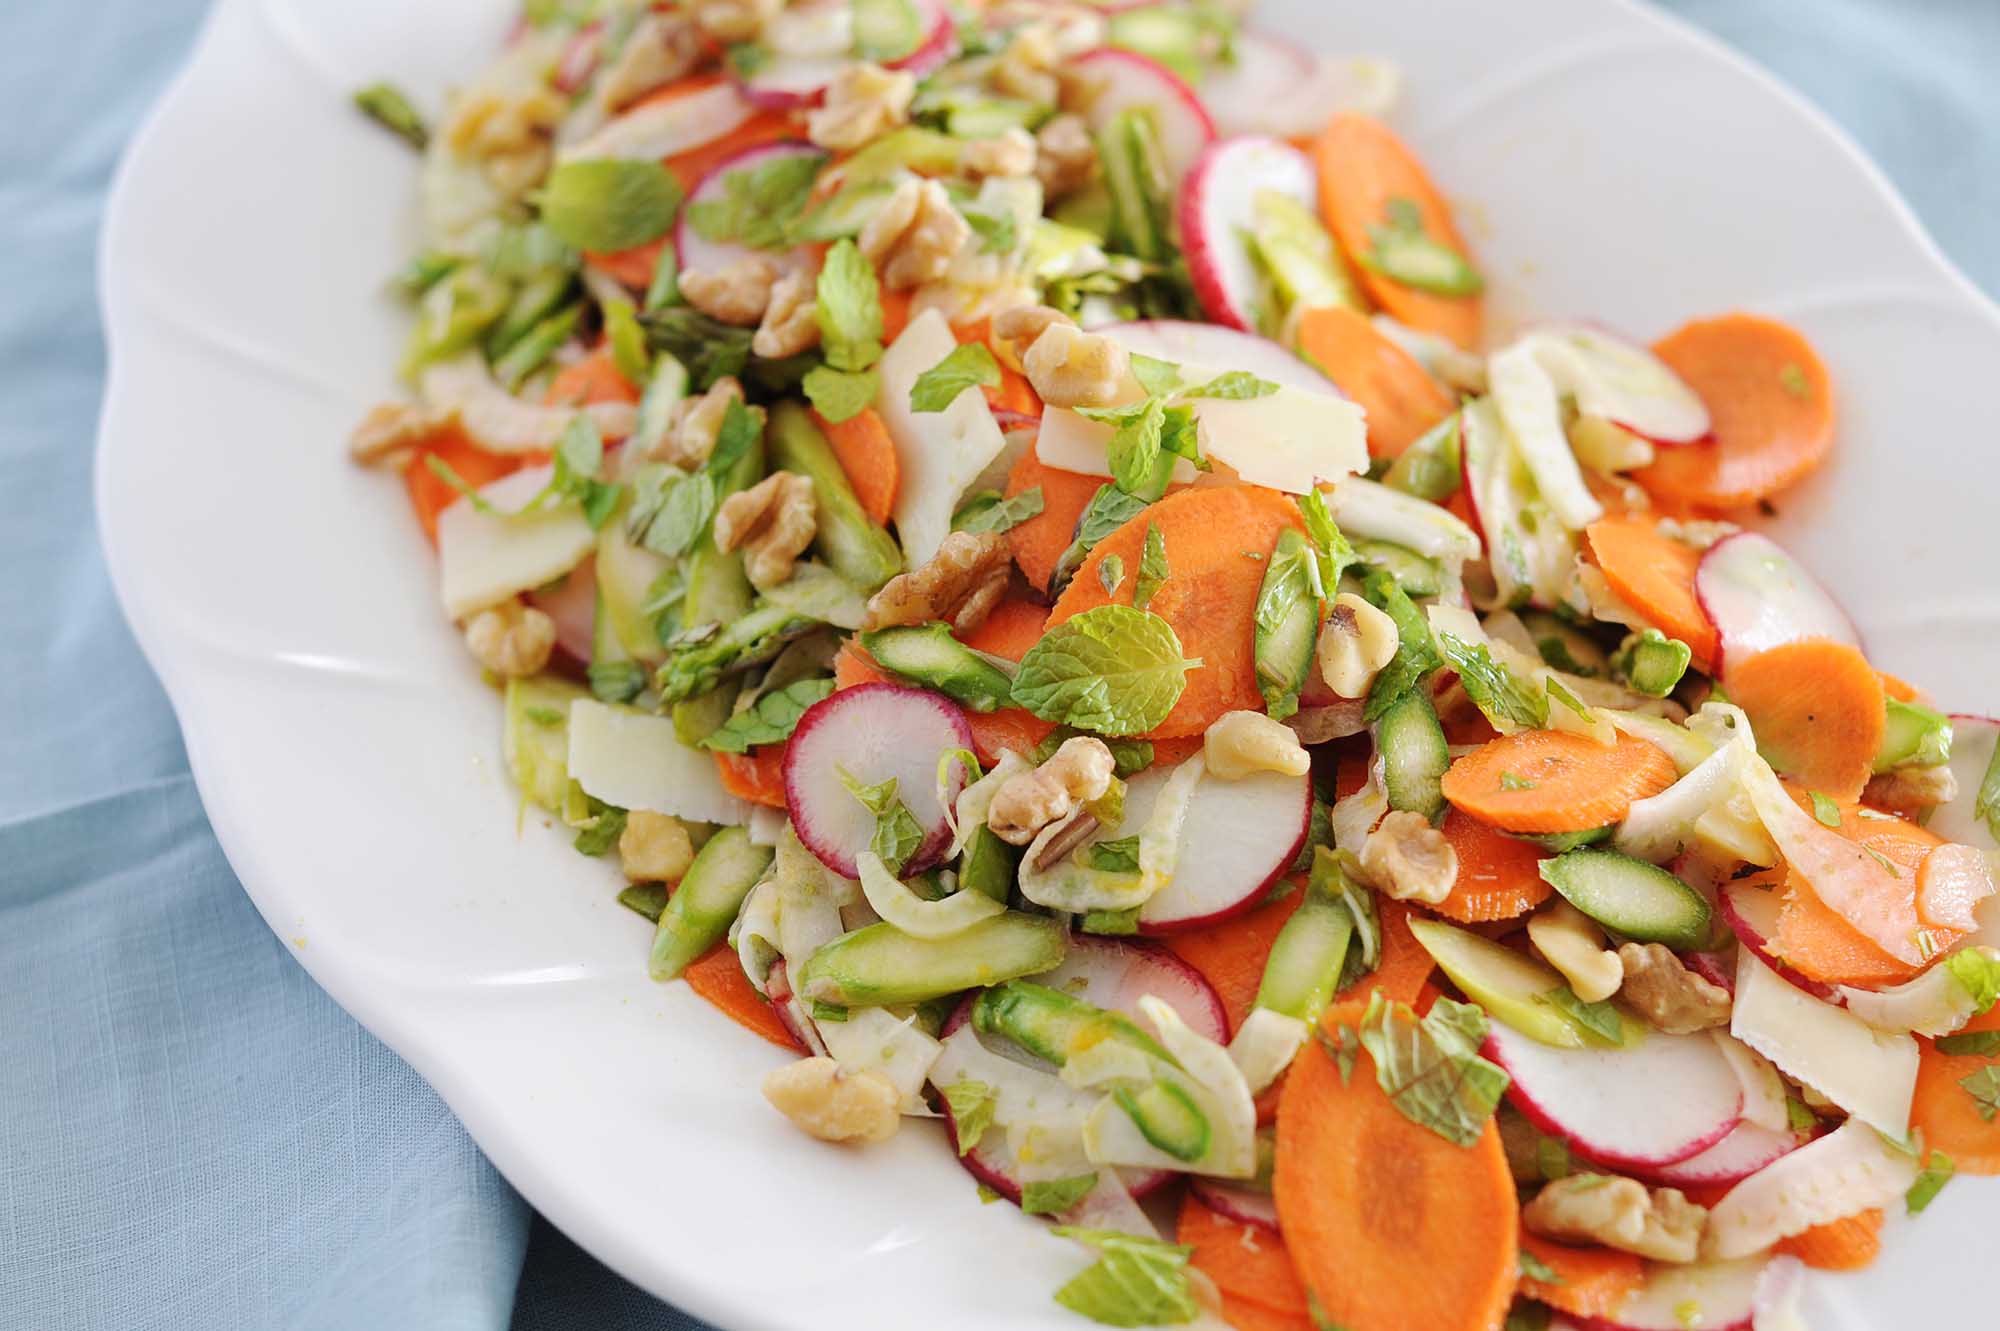 A white platter with an easy spring salad. Thinly sliced carrot, radish, fennel and asparagus are mixed together and mint leaves and chopped nuts are scattered around the top. The platter is on a light blue linen.